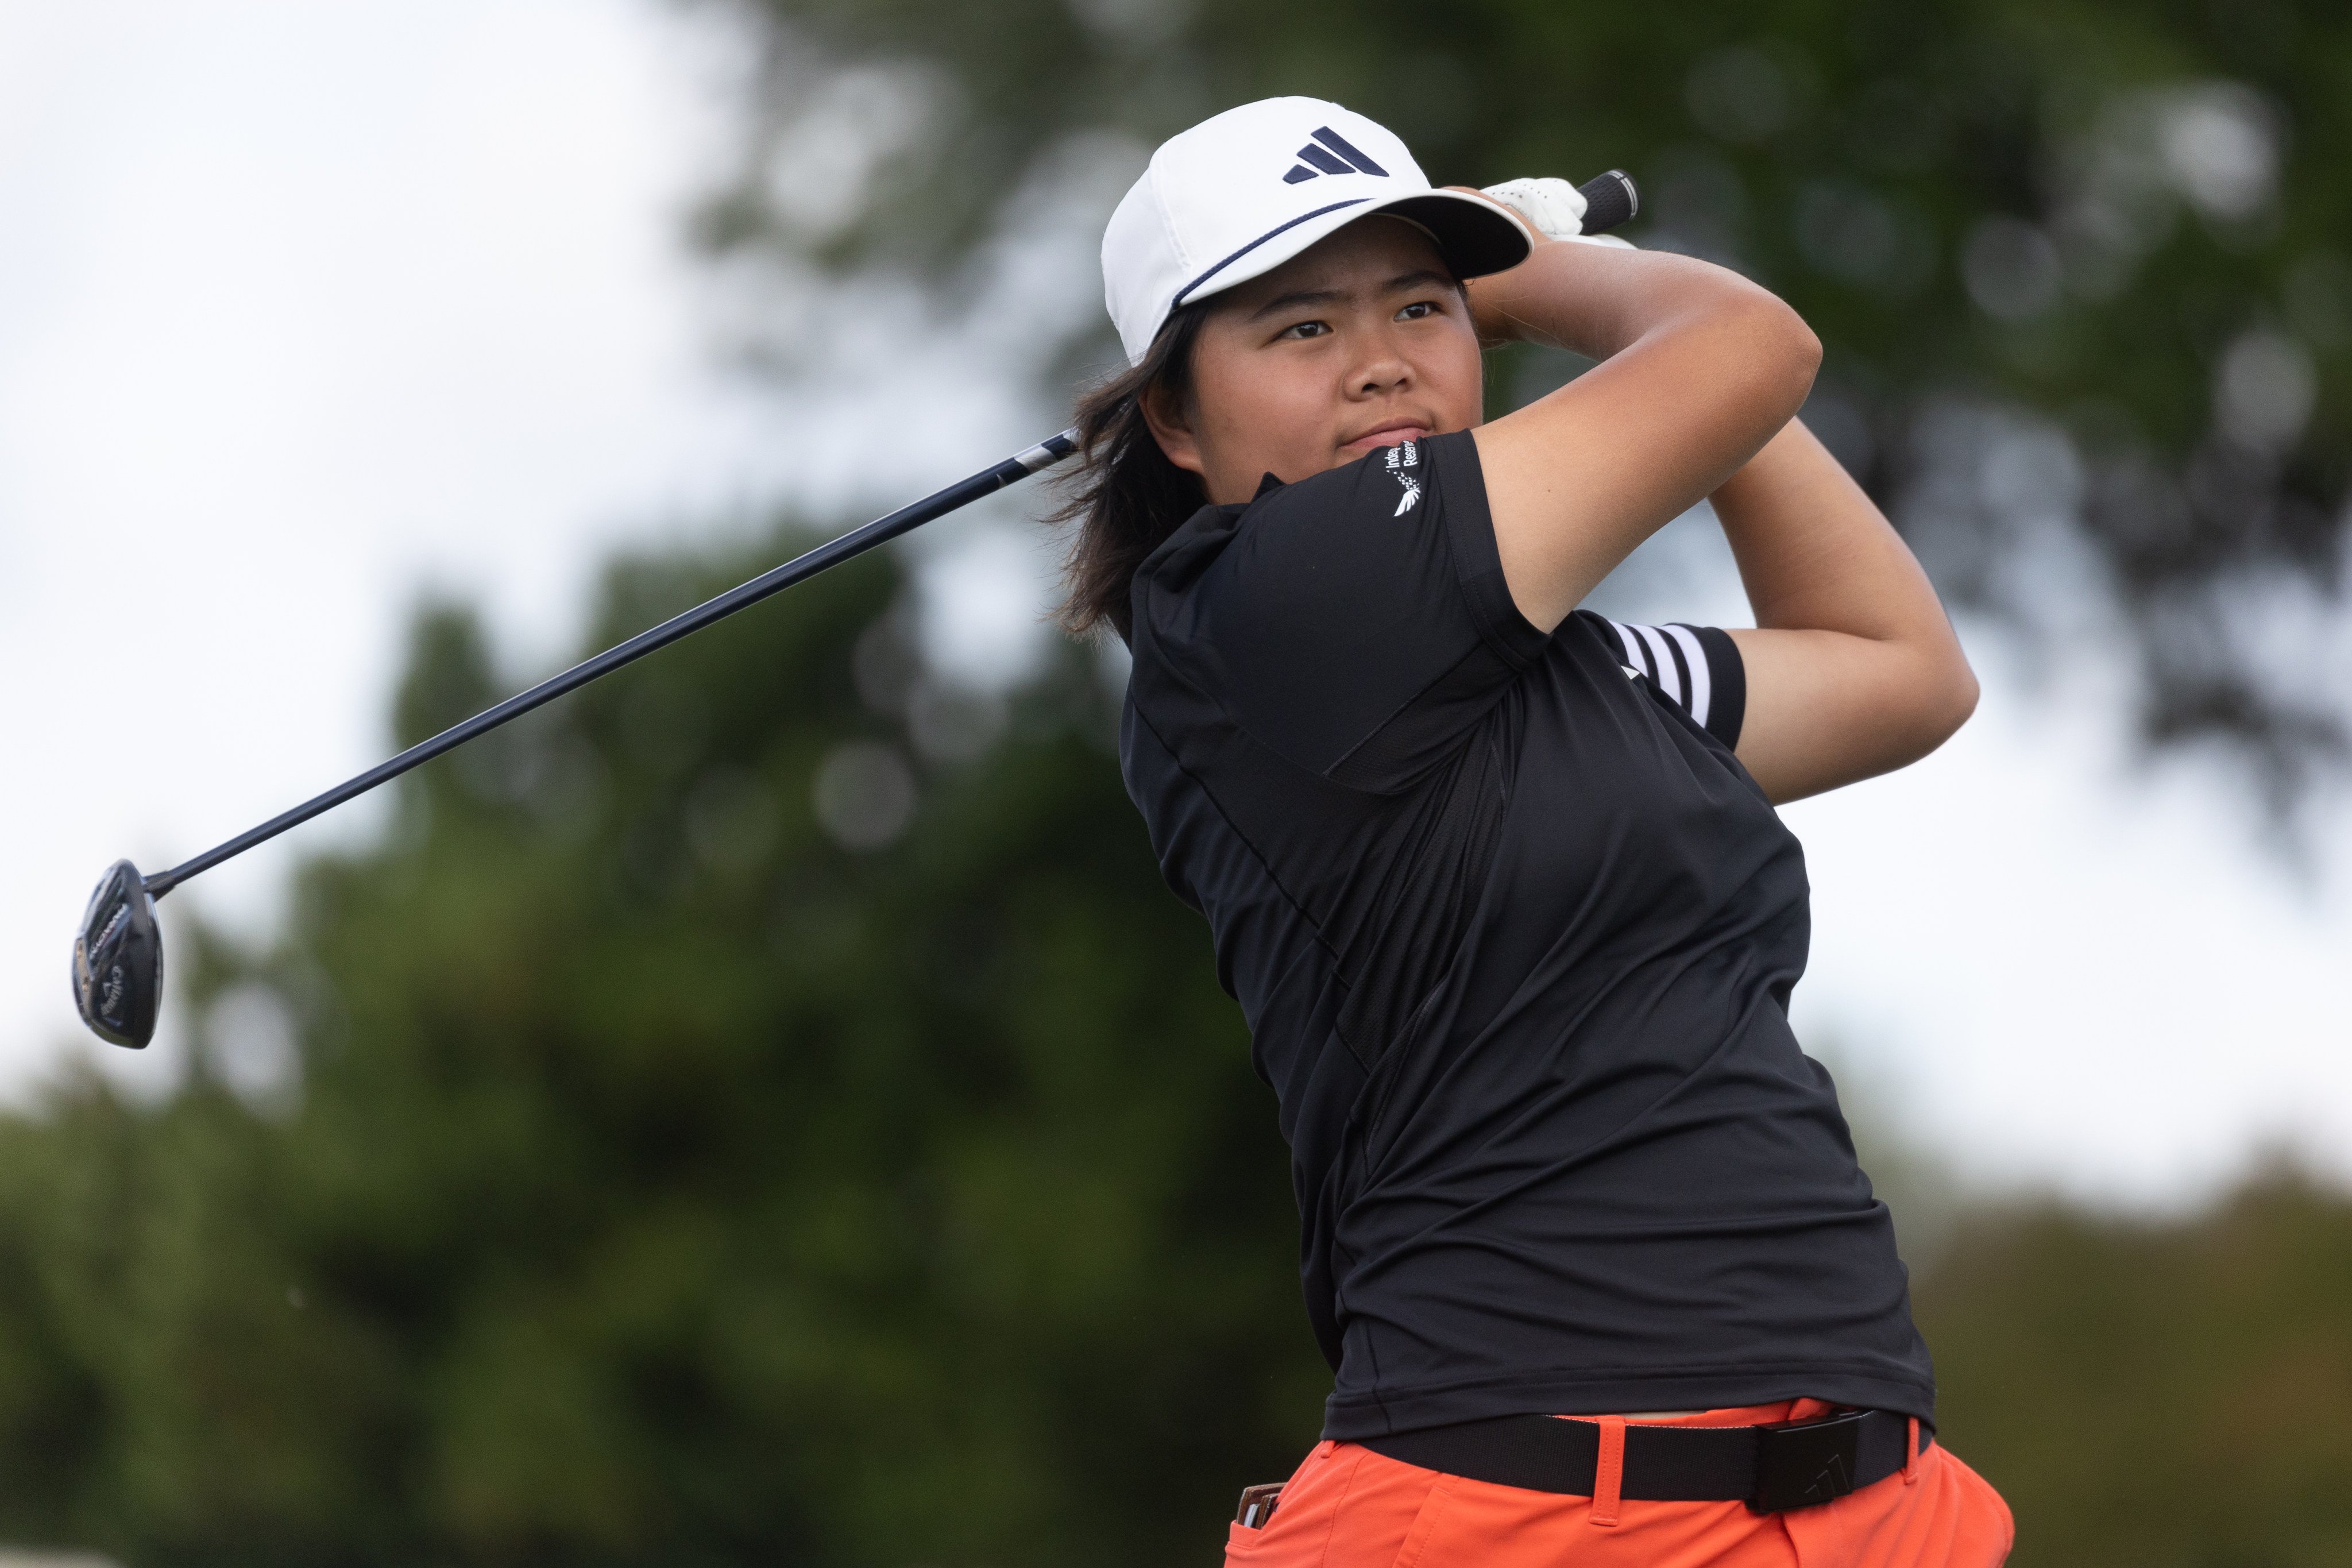 Shannon Tan in action during the Ladies Italian Open this month. Photo: Ladies European Tour